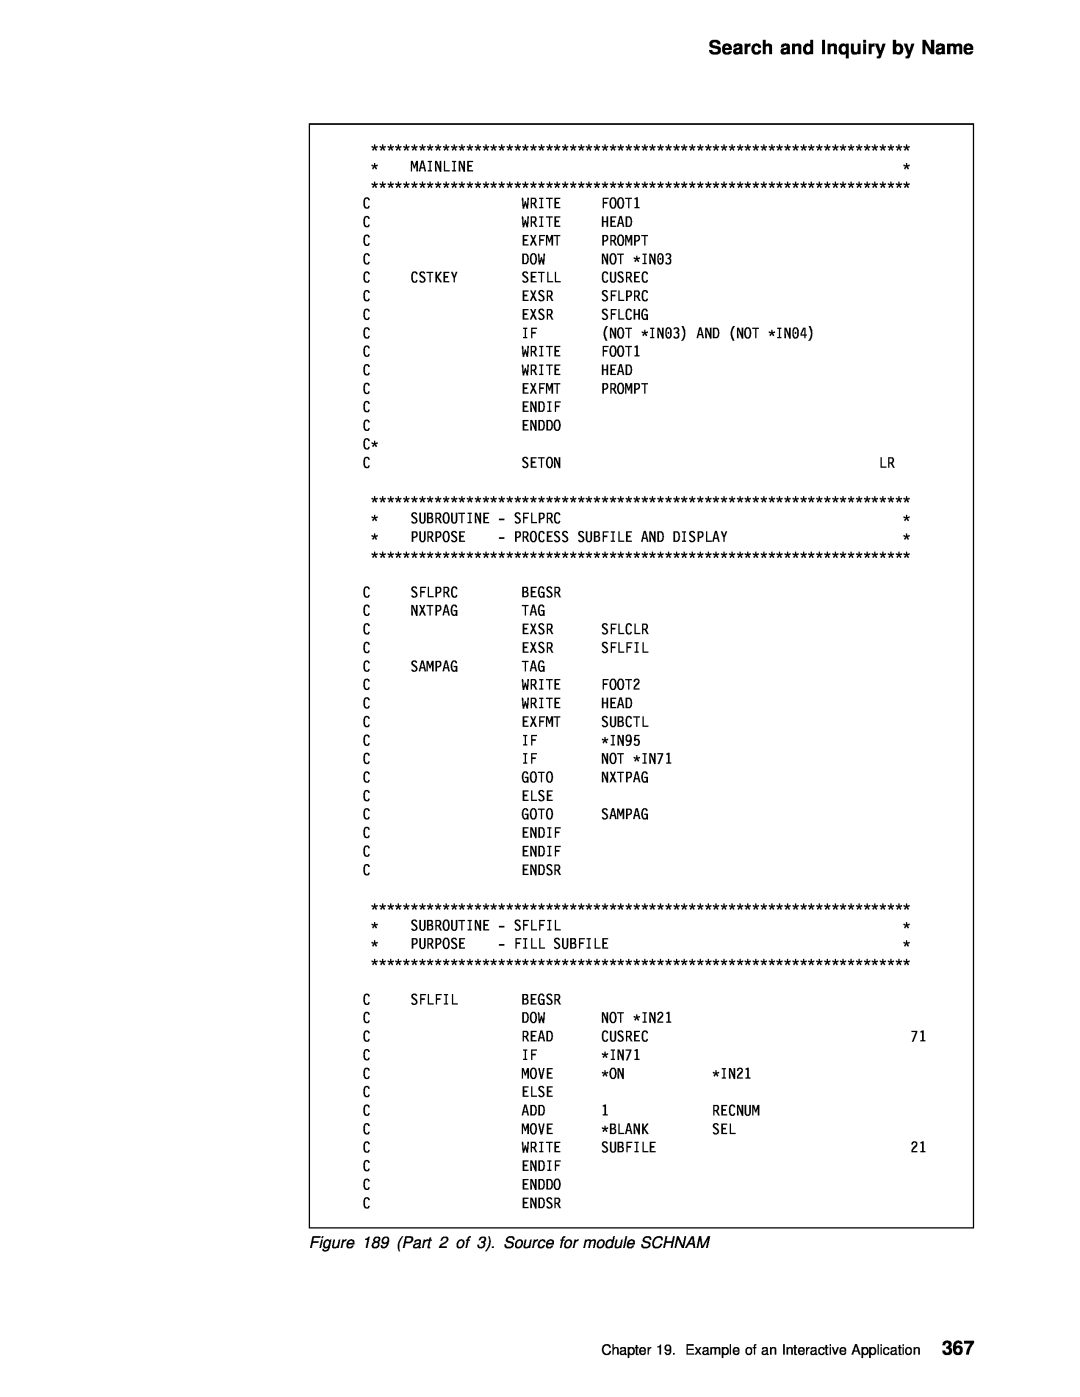 IBM AS/400 manual Search and Inquiry by Name, Example of an Interactive 367Application 